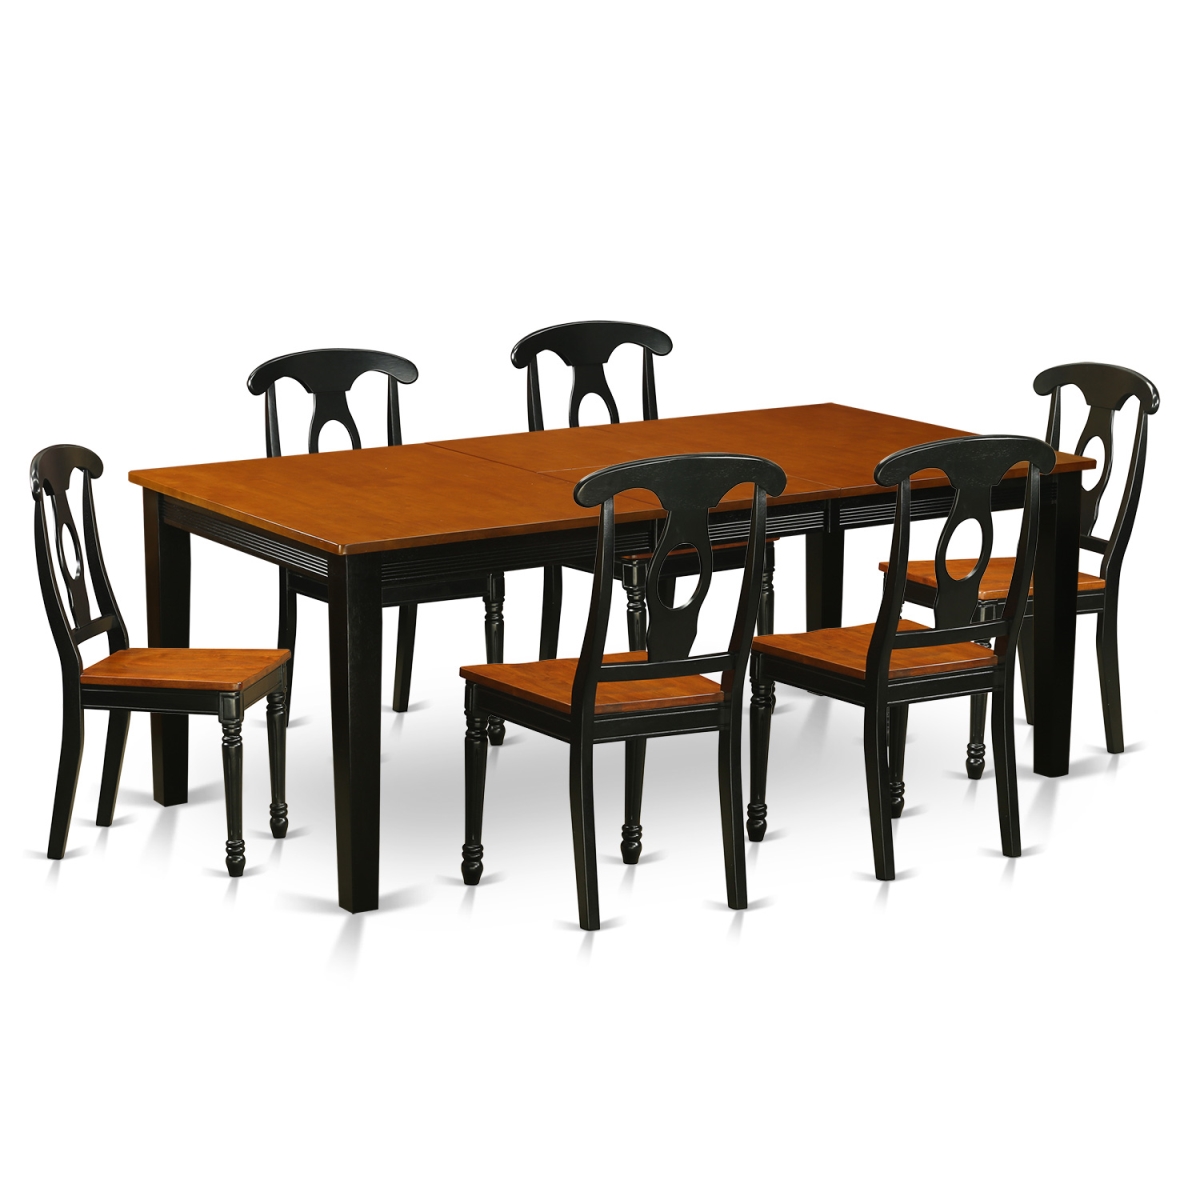 QUKE7-BCH-W Wood Seat Dining Room Set - Table with 6 Wooden Chair, Black & Cherry - 7 Piece -  East West Furniture